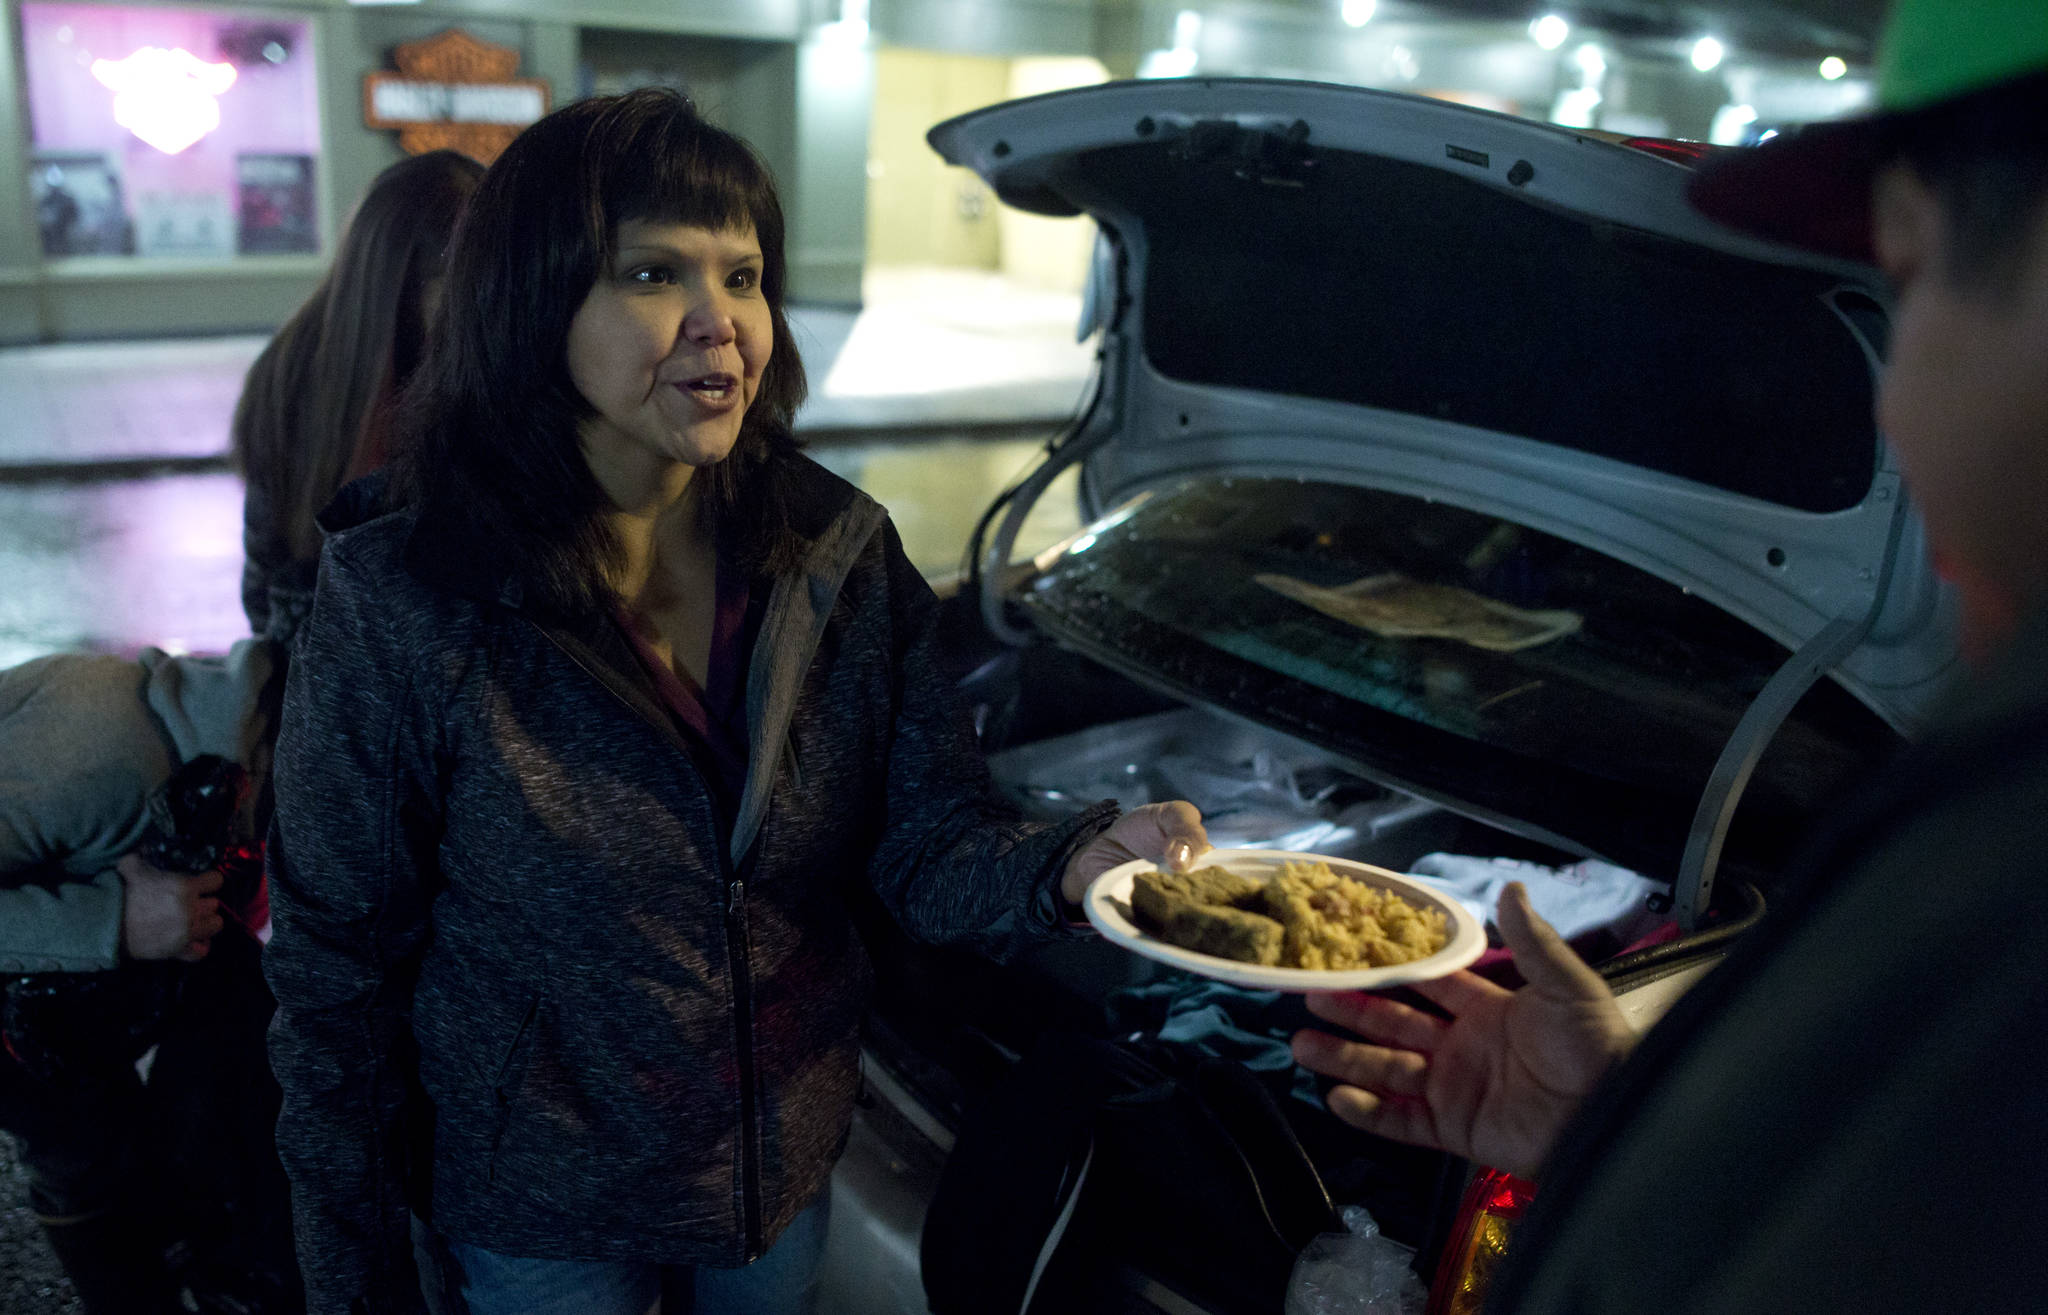 Roberta White serves hot food out of the back of a car to homeless people on South Franklin Street. (Michael Penn | Juneau Empire)